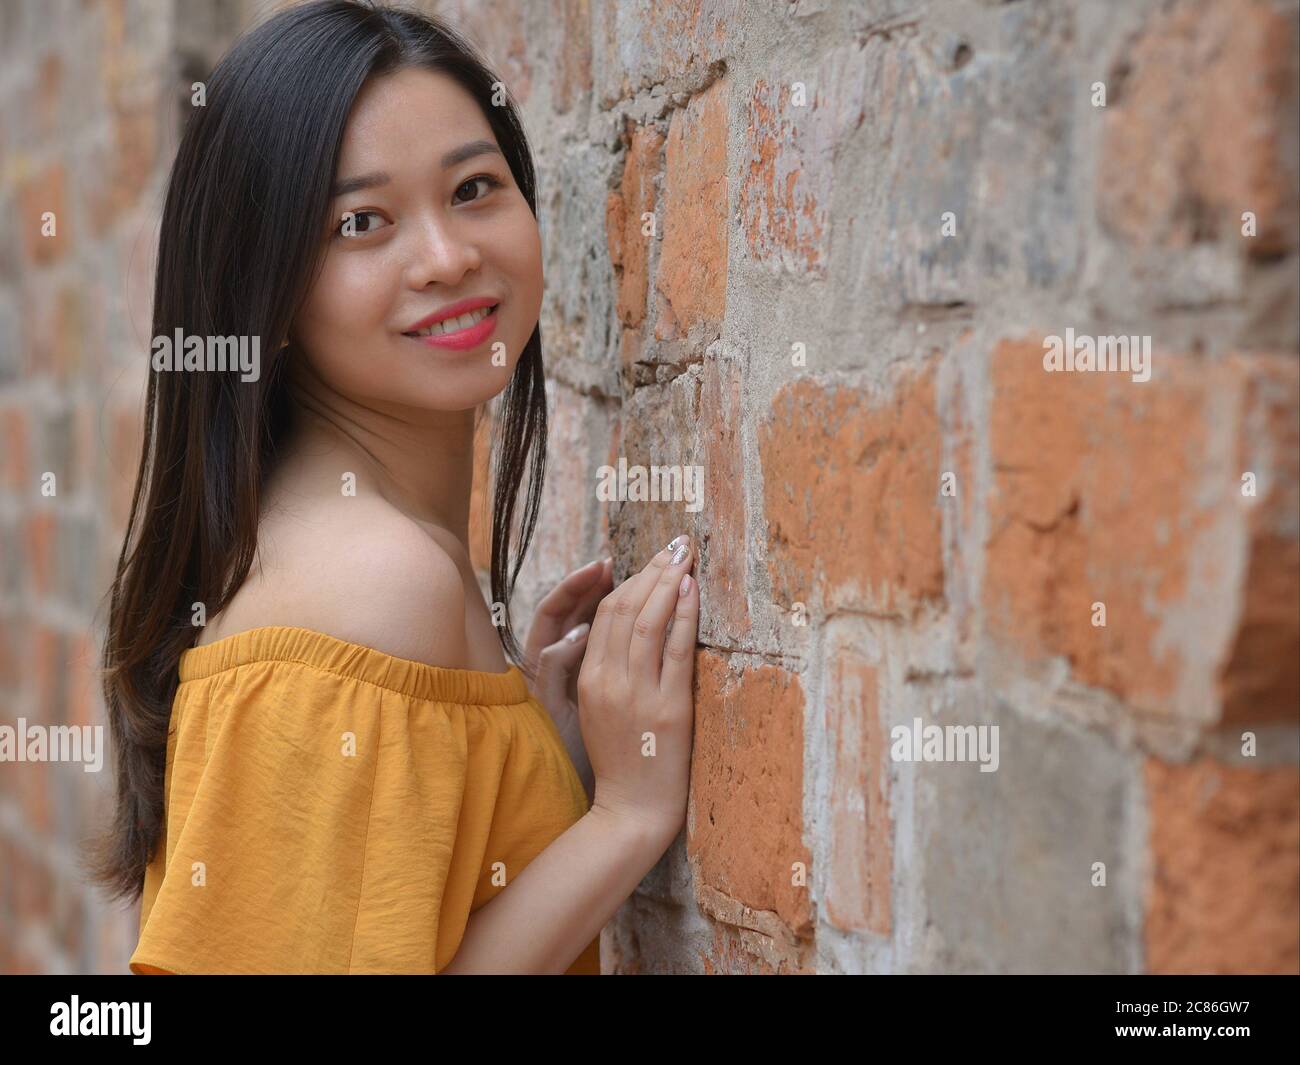 Beautiful Vietnamese girl wears a yellow off-shoulder top and poses for the camera. Stock Photo